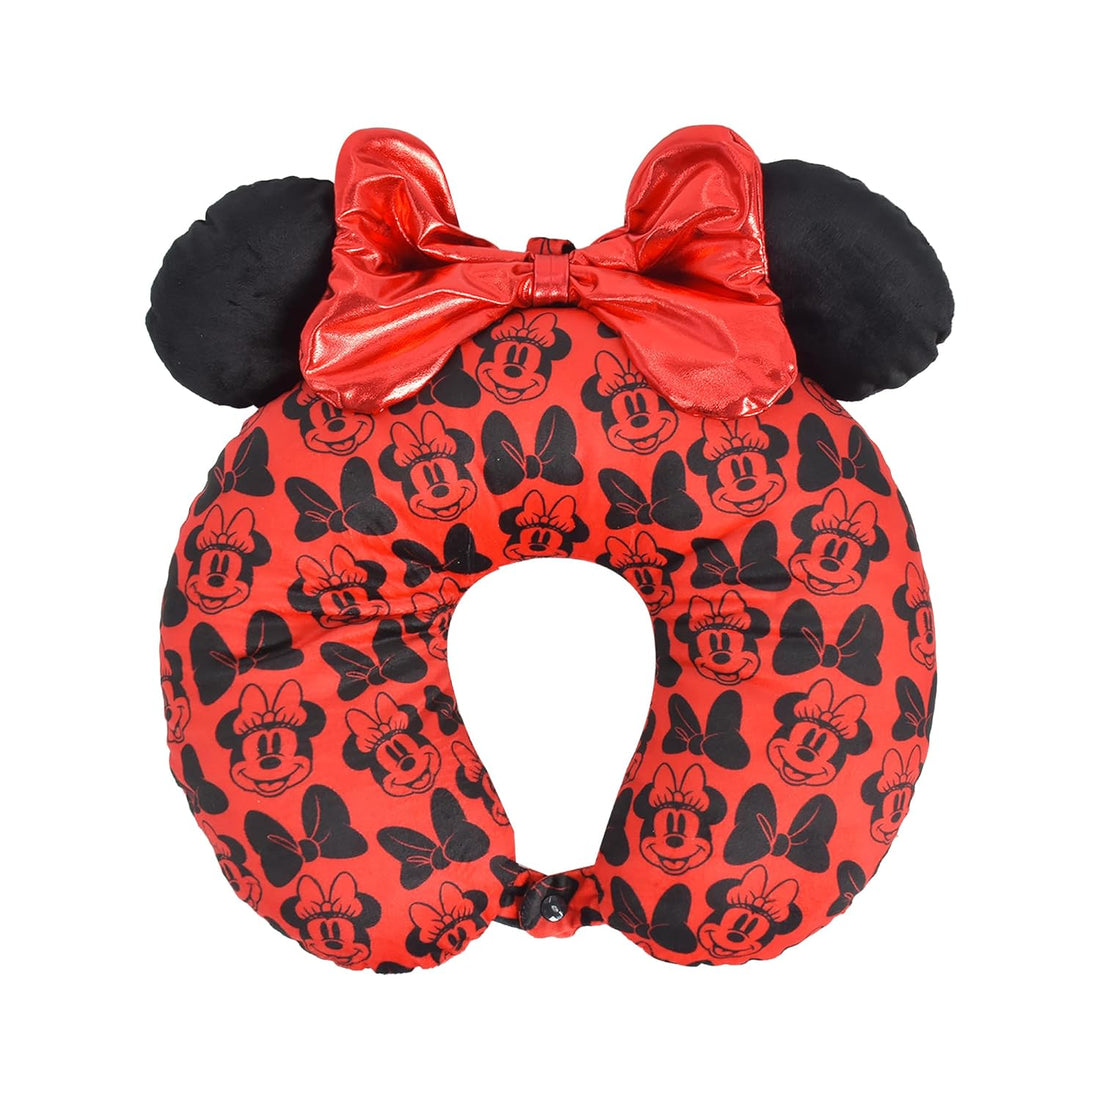 Disney Minnie Mouse Travel Neck Pillow with 3D Ears and Bow for Airplane, Car and Office Comfortable and Breathable, Red/Black